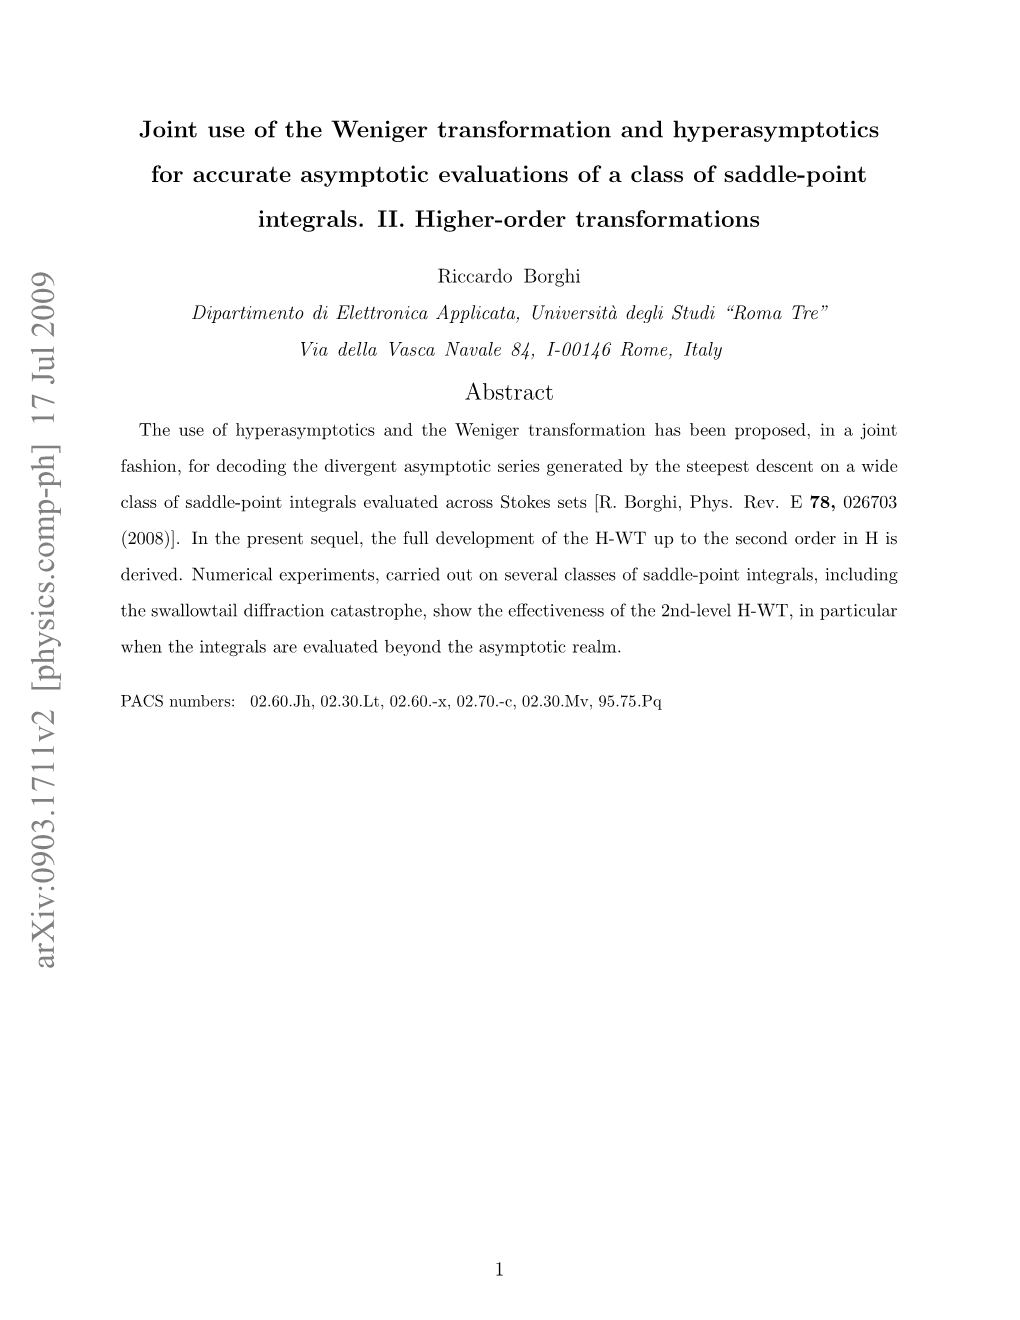 Joint Use of the Weniger Transformation and Hyperasymptotics for Accurate Asymp- Totic Evaluations of a Class of Saddle-Point Integrals,” Phys